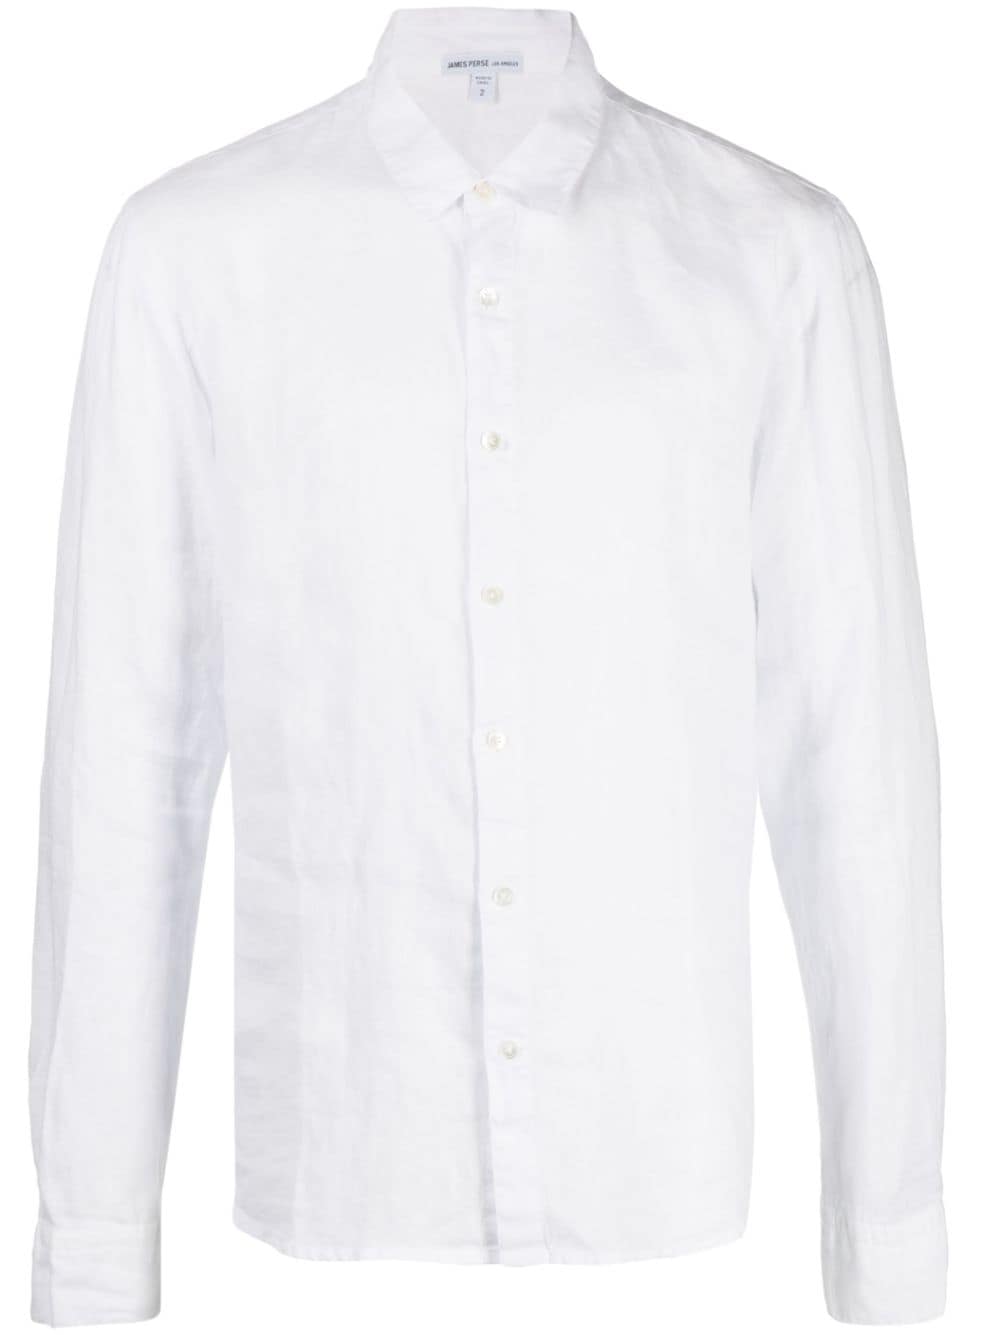 James Perse long-sleeved linen shirt - White von James Perse